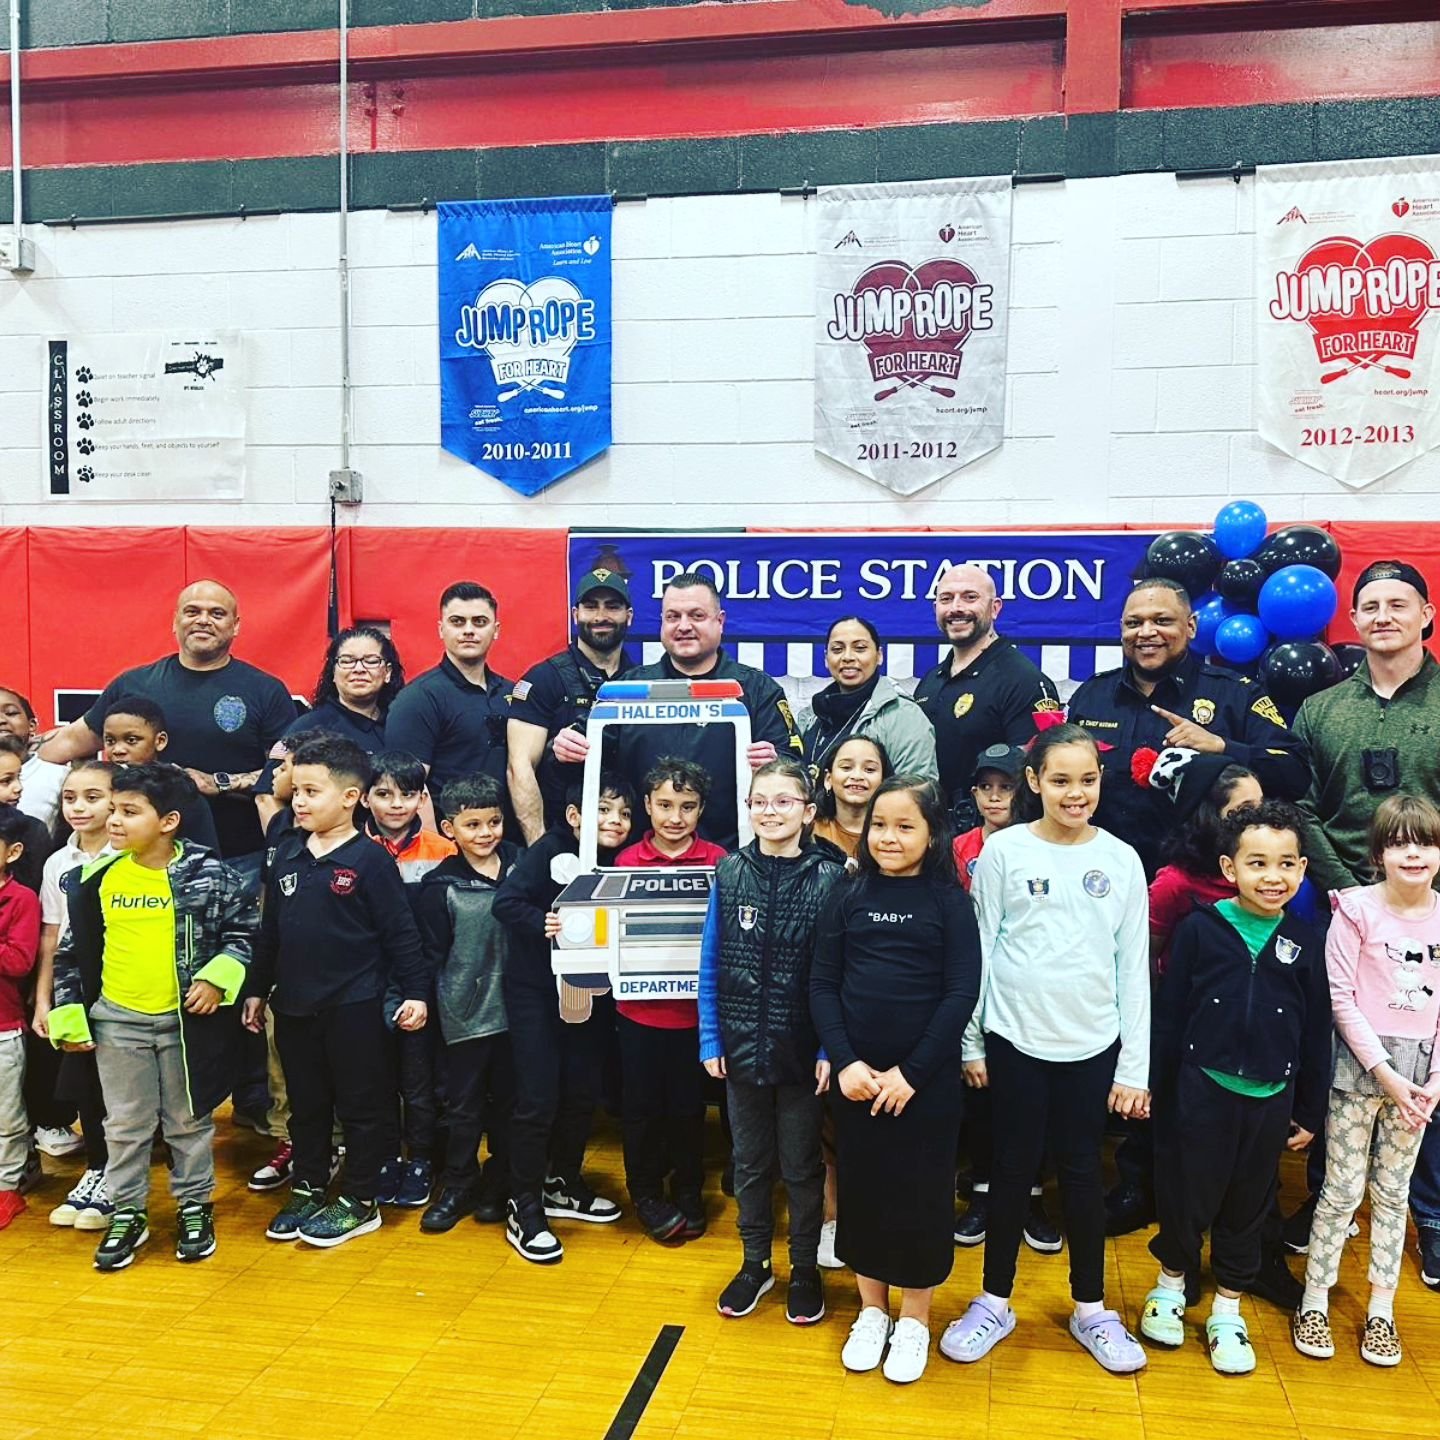 🖍️The Haledon Police Department had an amazing time at the Color with a Cop event hosted at Haledon Public School! 🚓🎨 

It was wonderful connecting with the kids and fostering positive relationships through art and creativity. Thank you to everyon